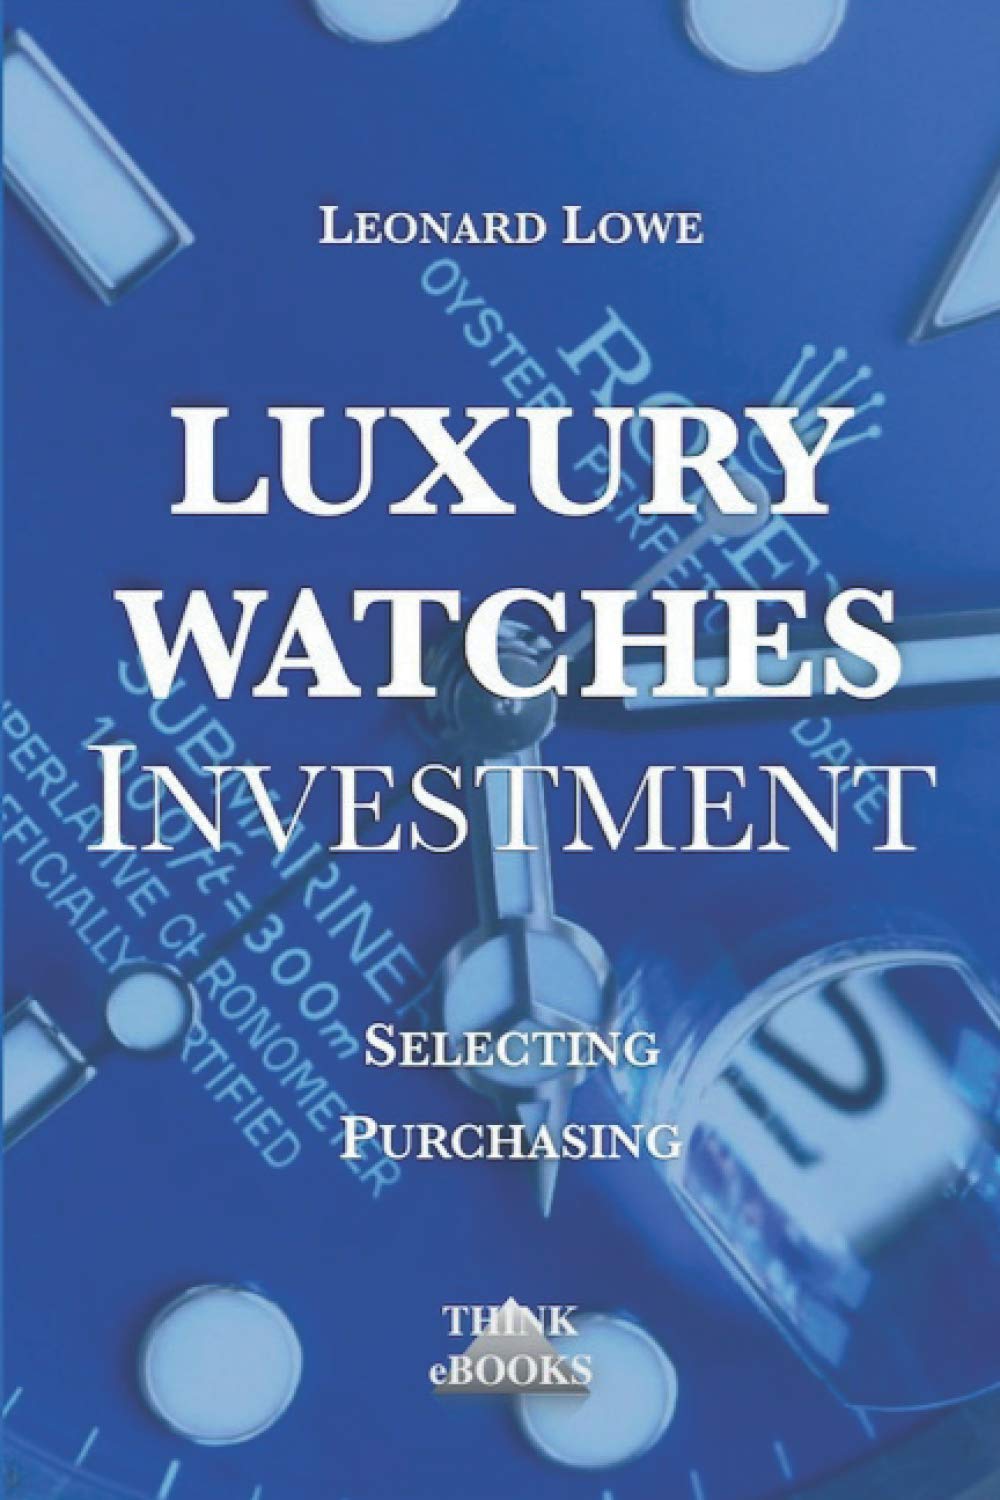 Luxury Watches as Investment: Watches Luxury Watches Investment Watches for Men Value Investing Investment Books Rolex Watches Patek Philippe